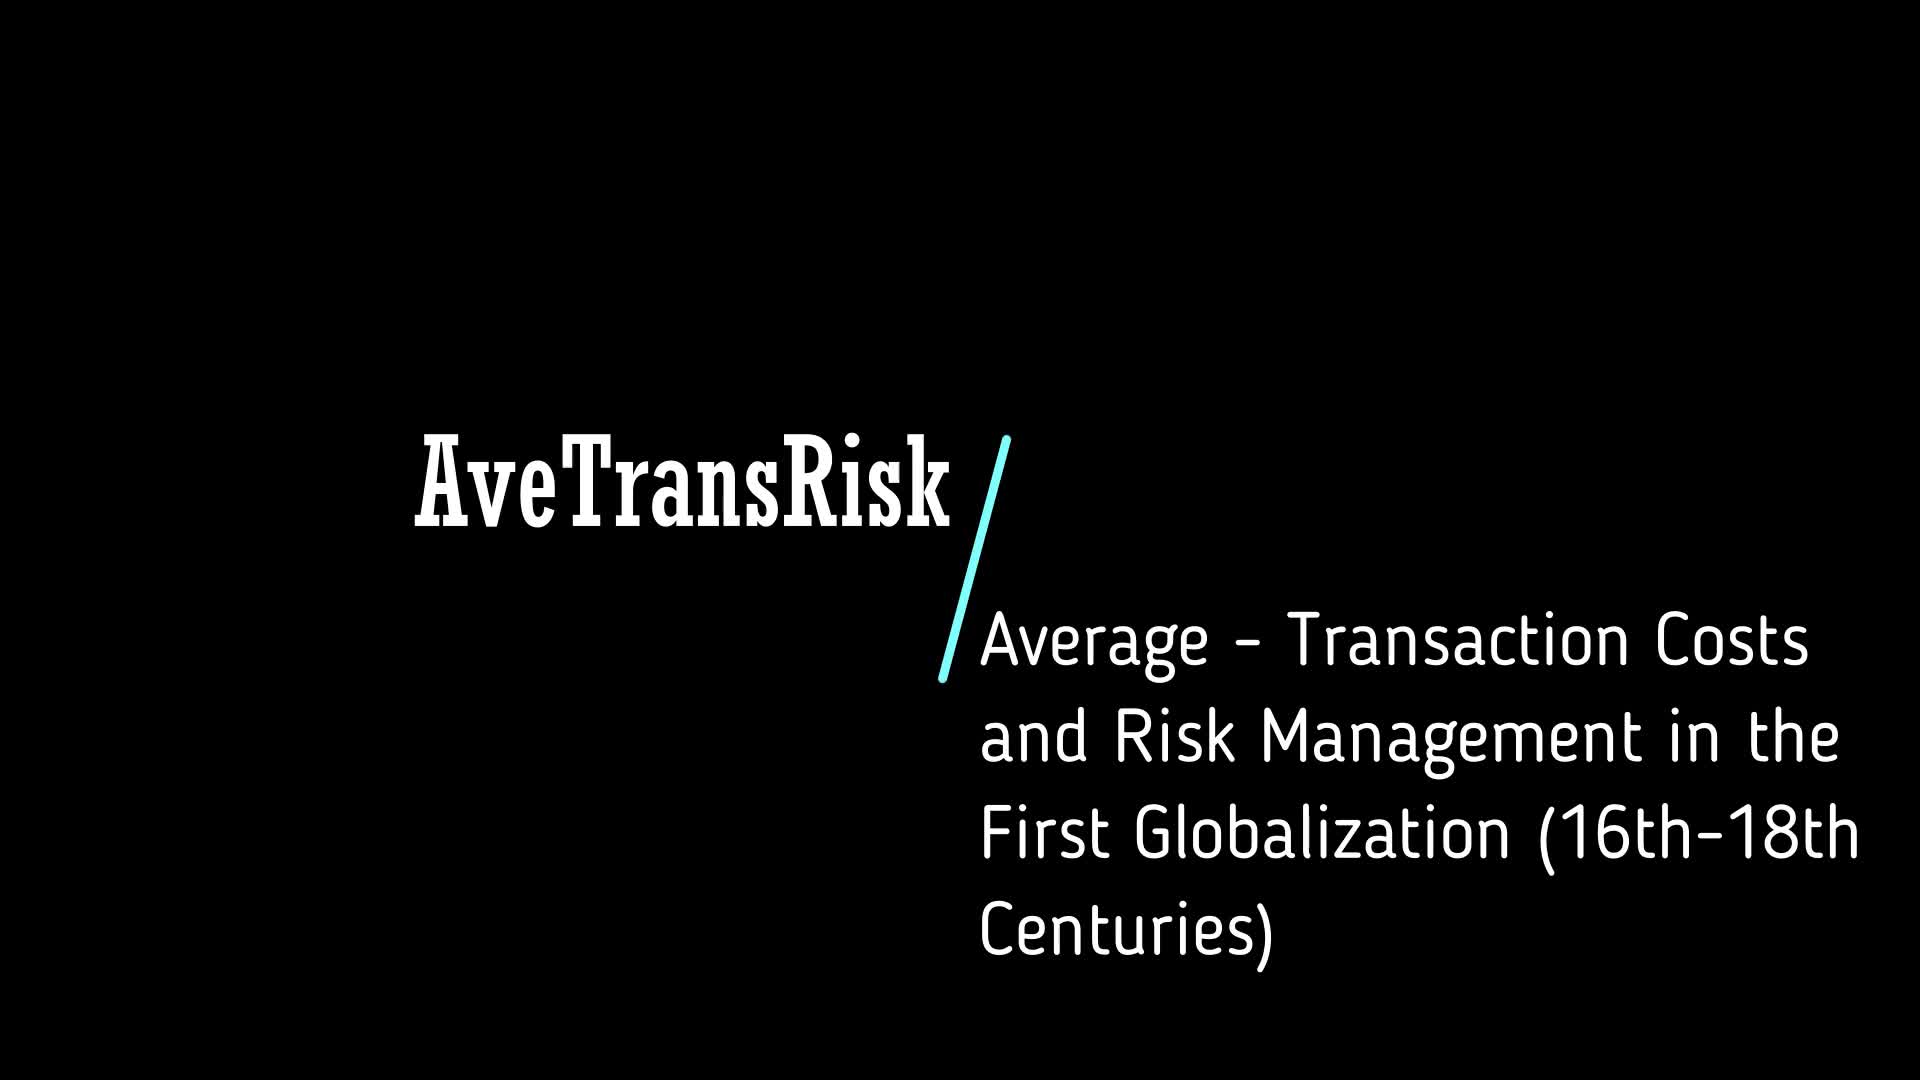  Average - Transaction Costs and Risk Management during the First Globalization (16th - 18th centuries)(